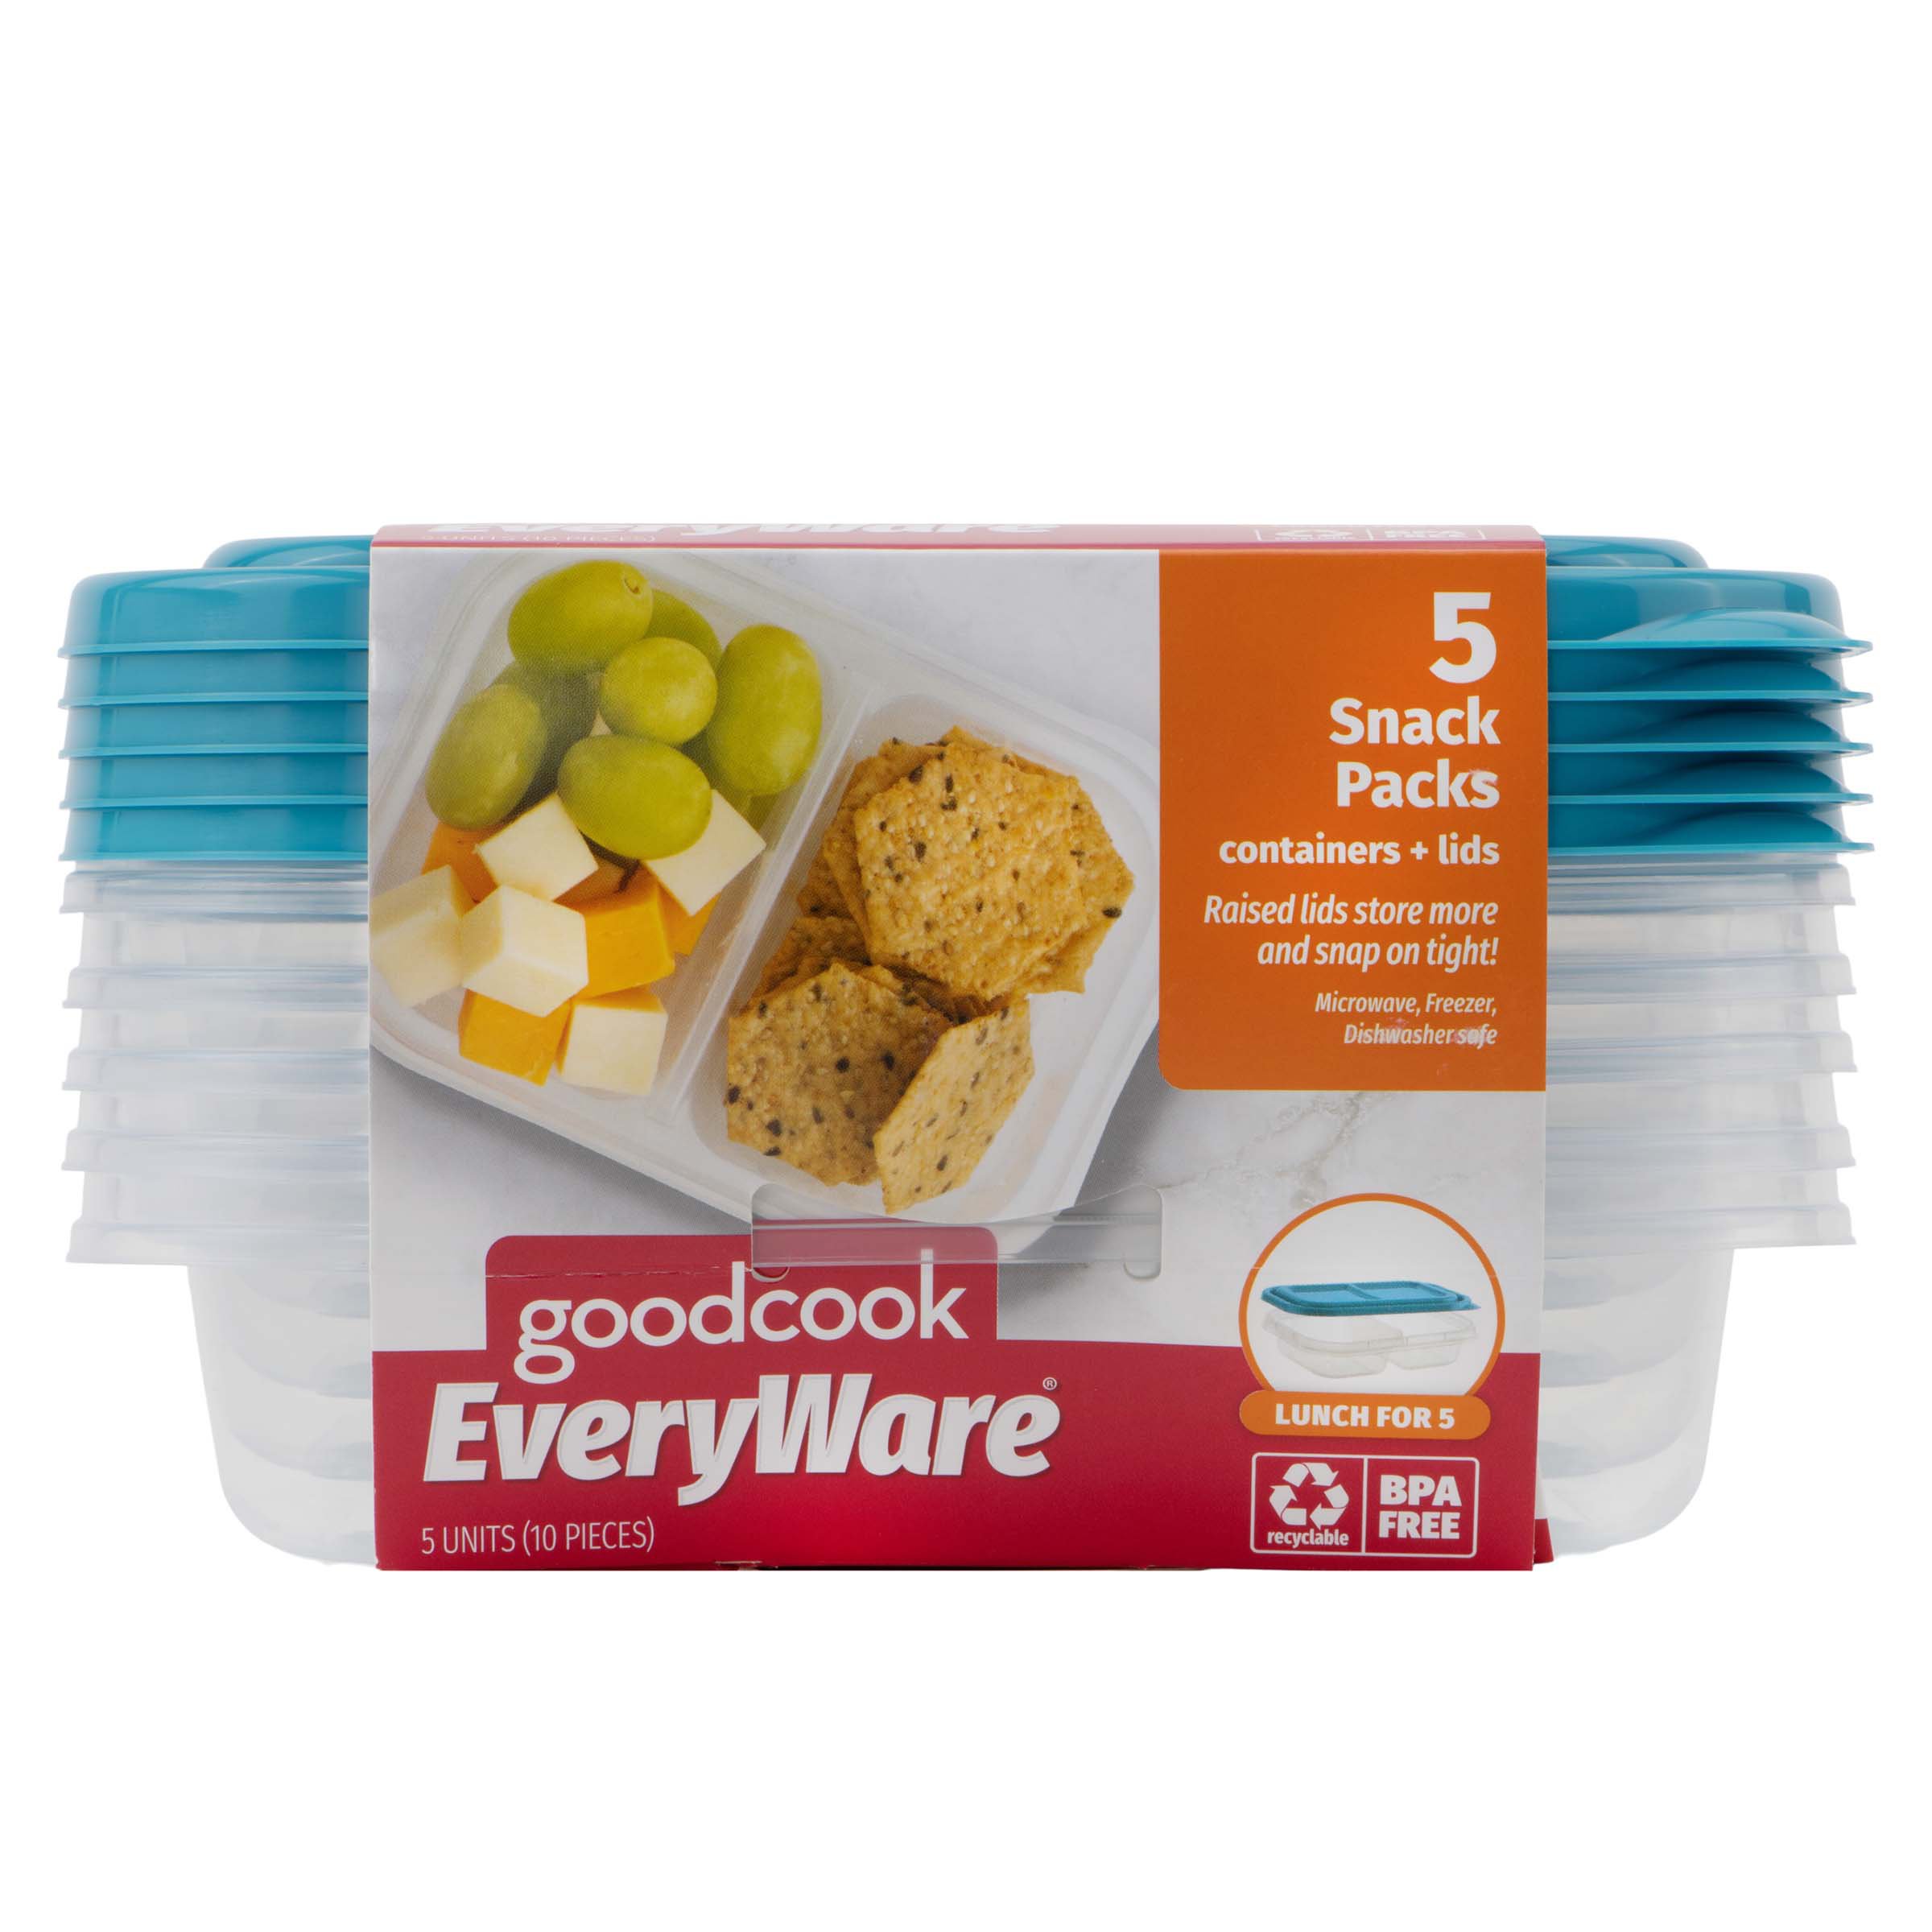 Good Cook EveryWare Snack Pack Containers + Lids - Shop Food